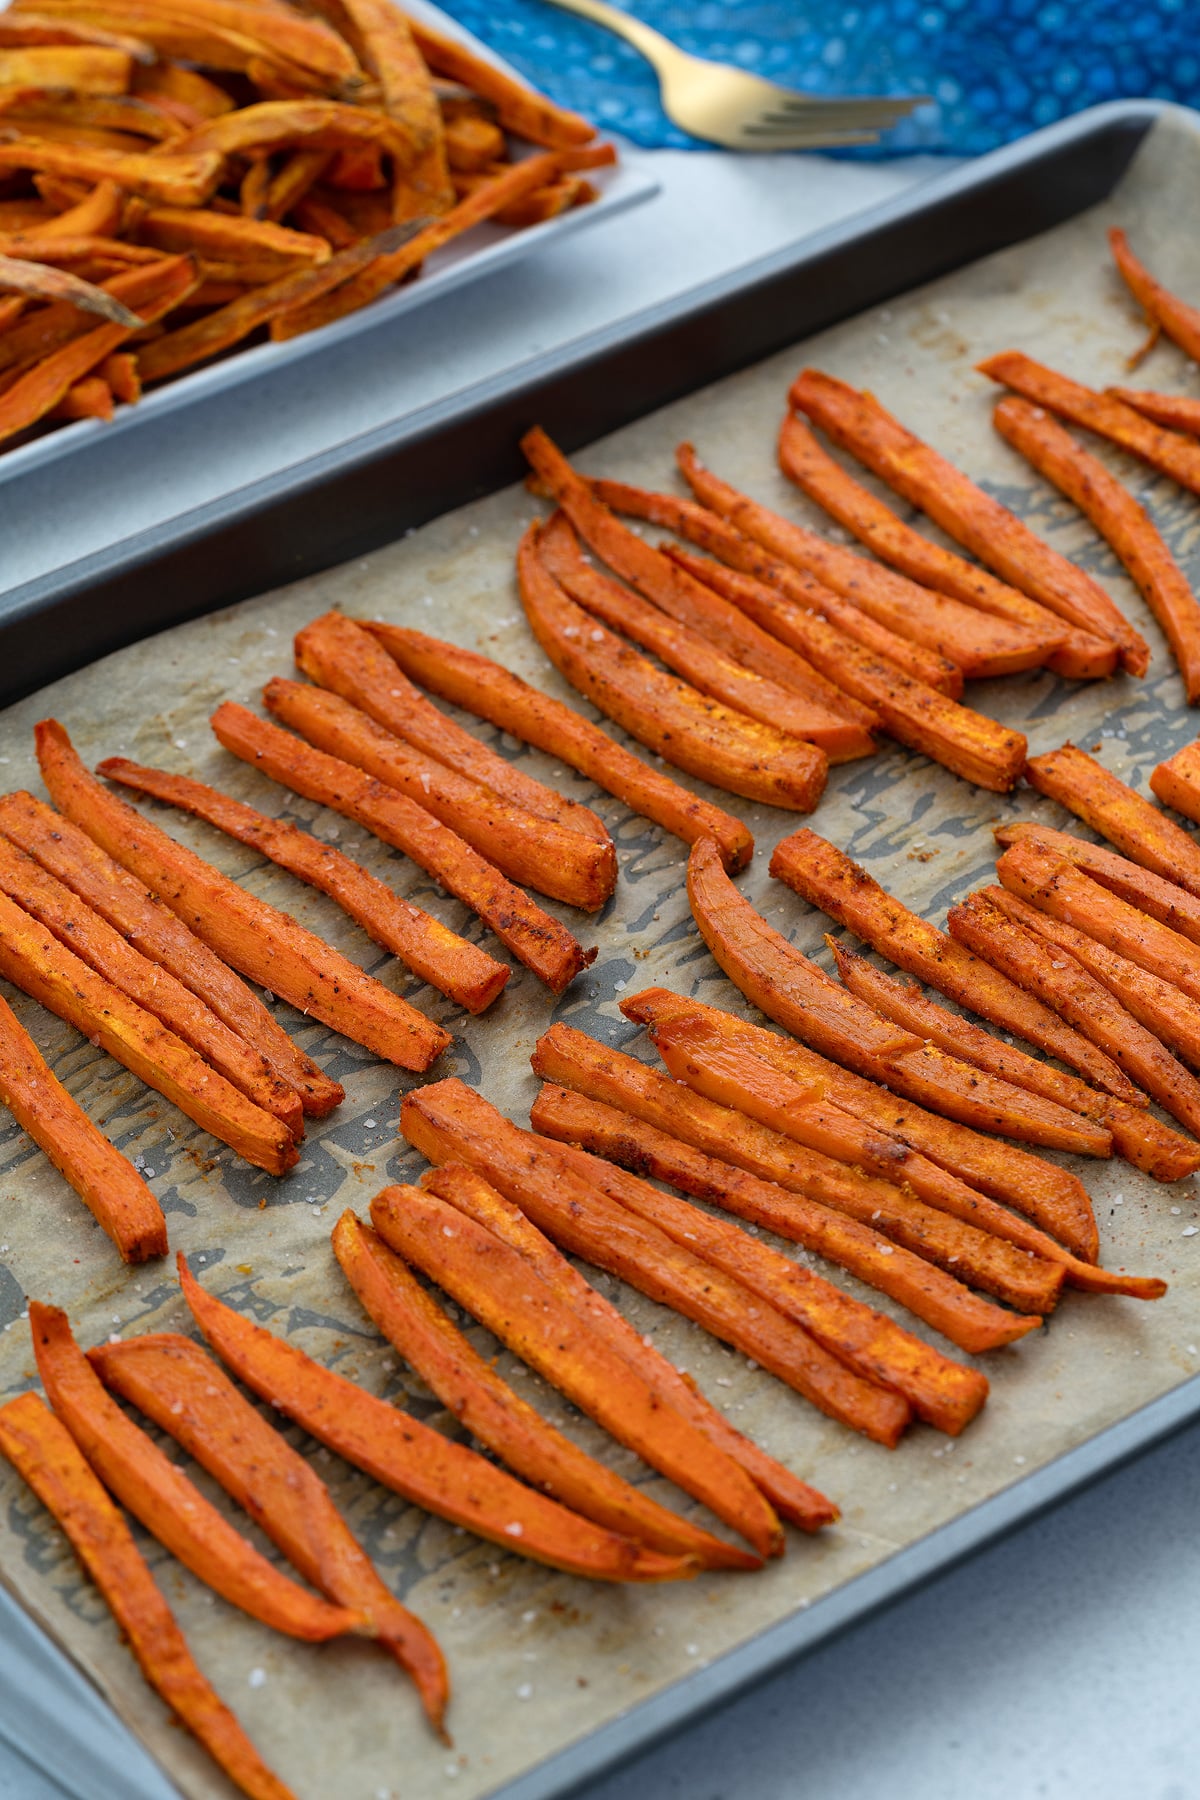 Baked sweet potato fries on a baking tray with a golden fork and a towel placed nearby.